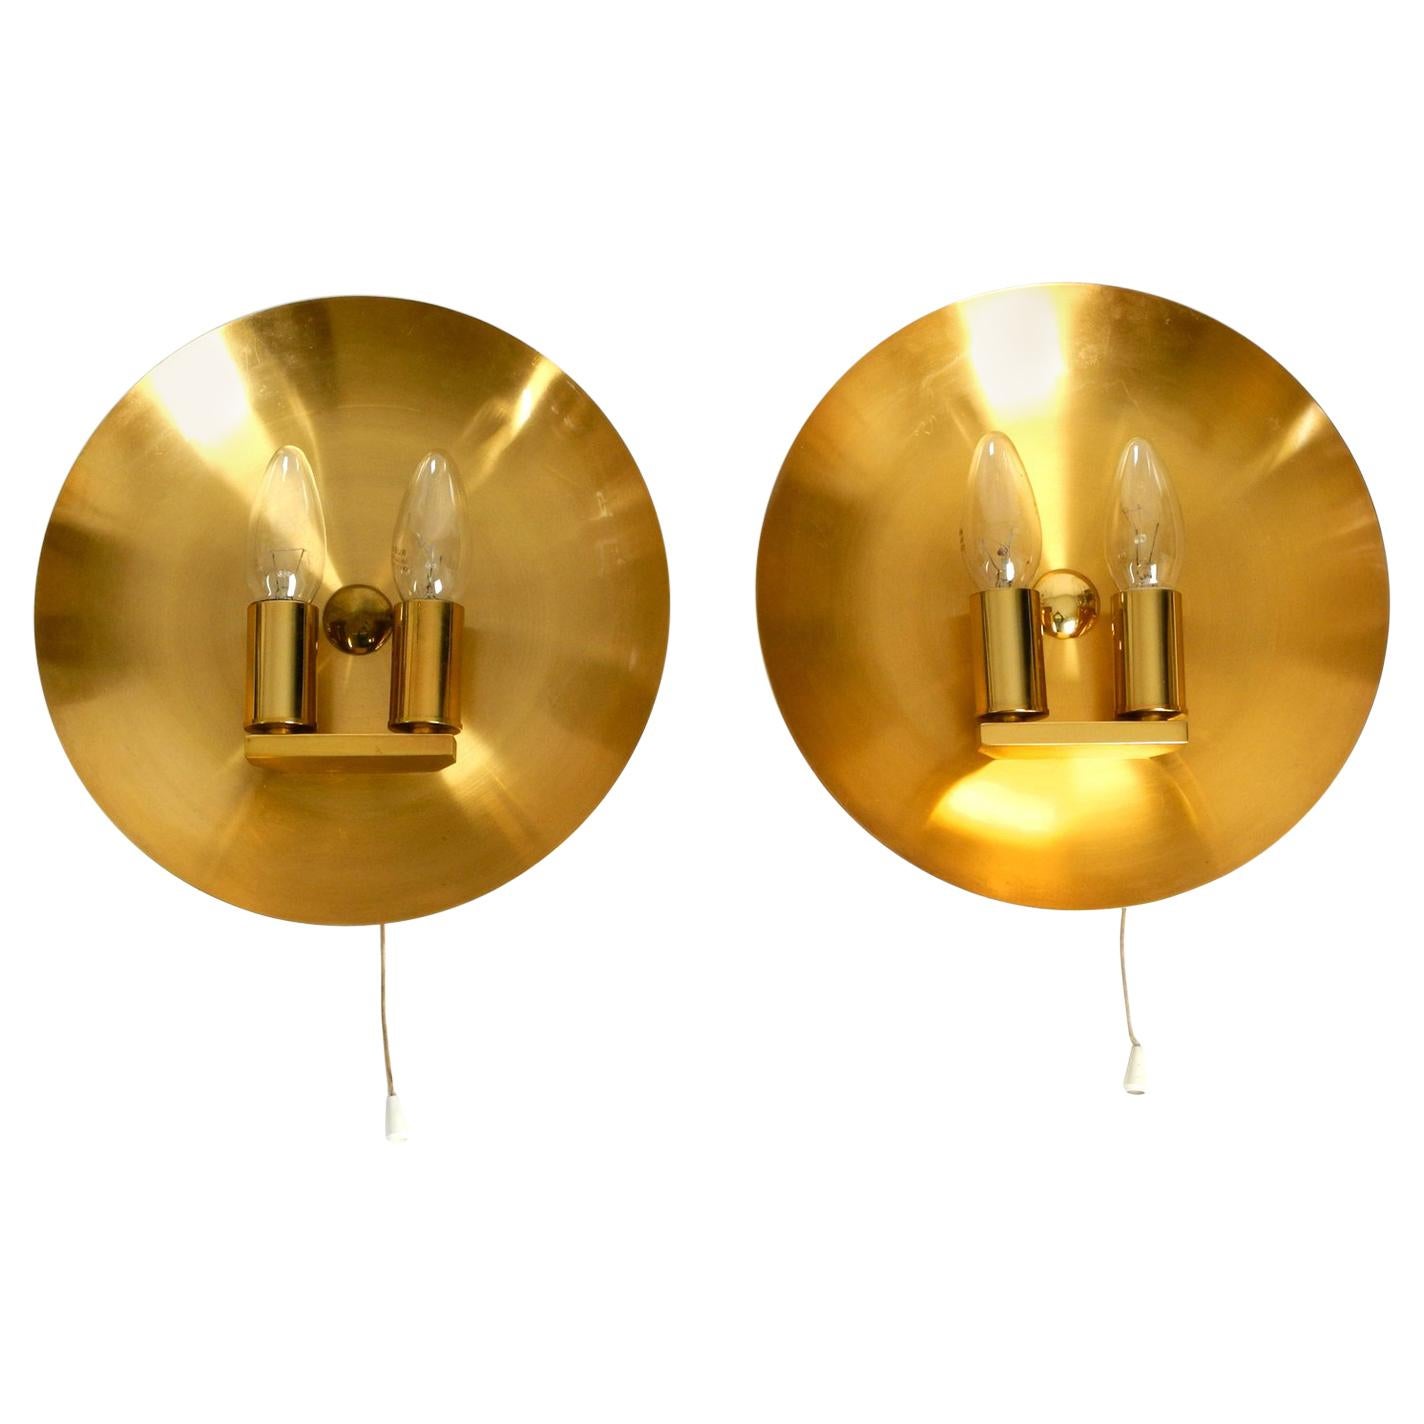 Pair of Very Rare and High Quality 1970s Round Brass Wall Lamps, Sconces by WKR